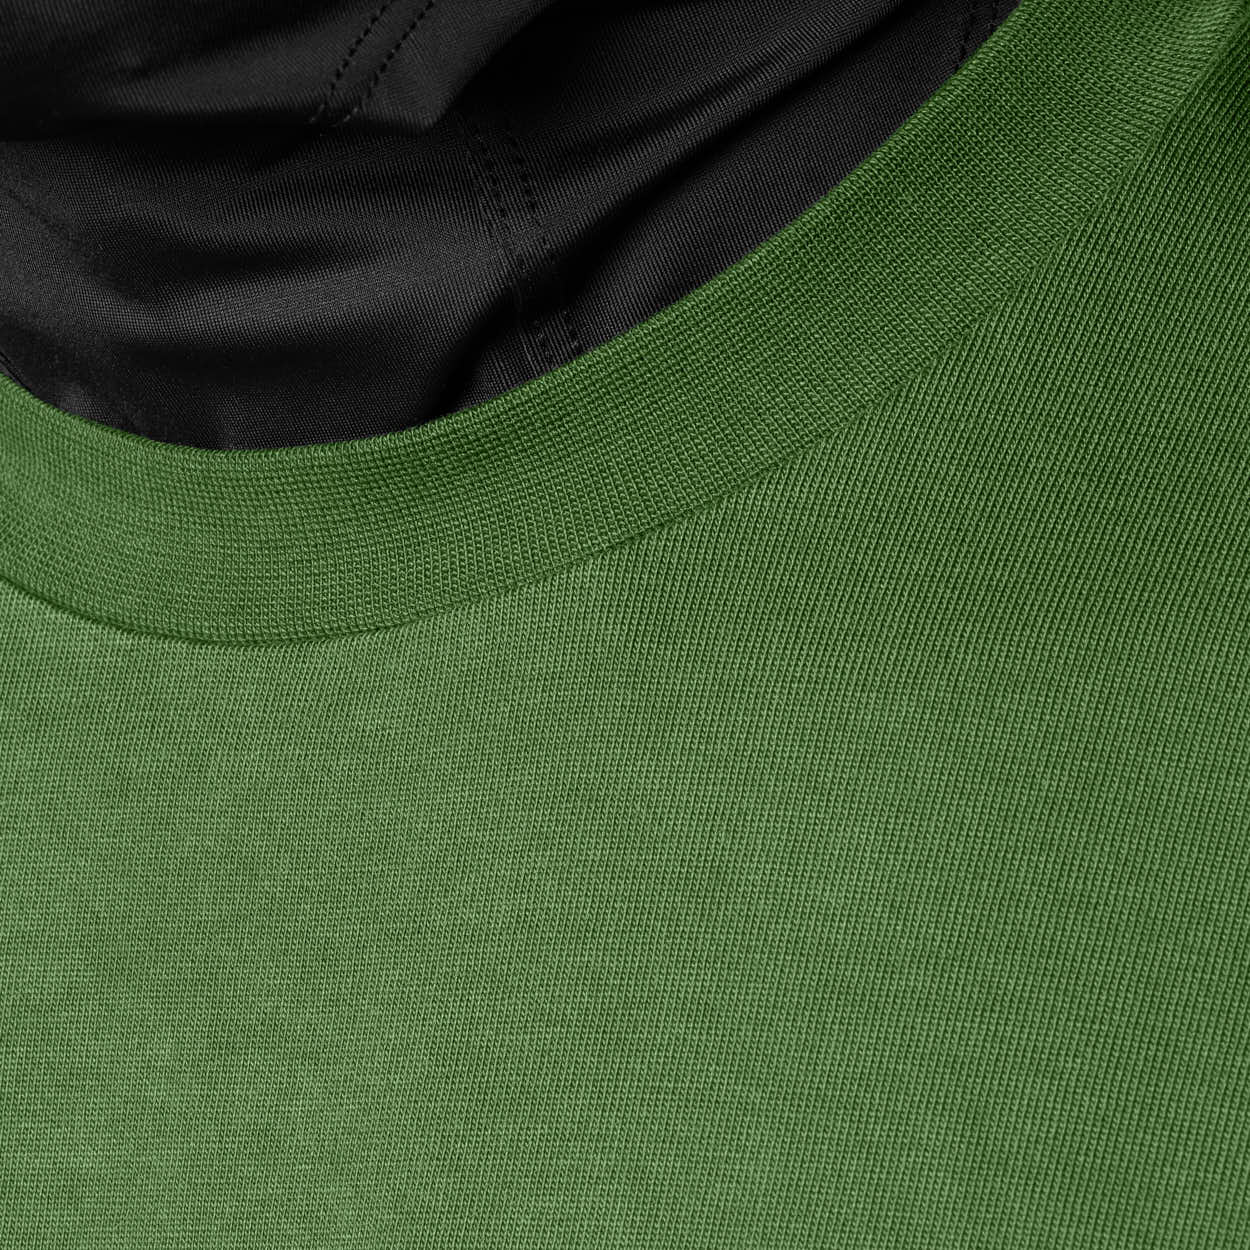 Embroidered Green T-shirt